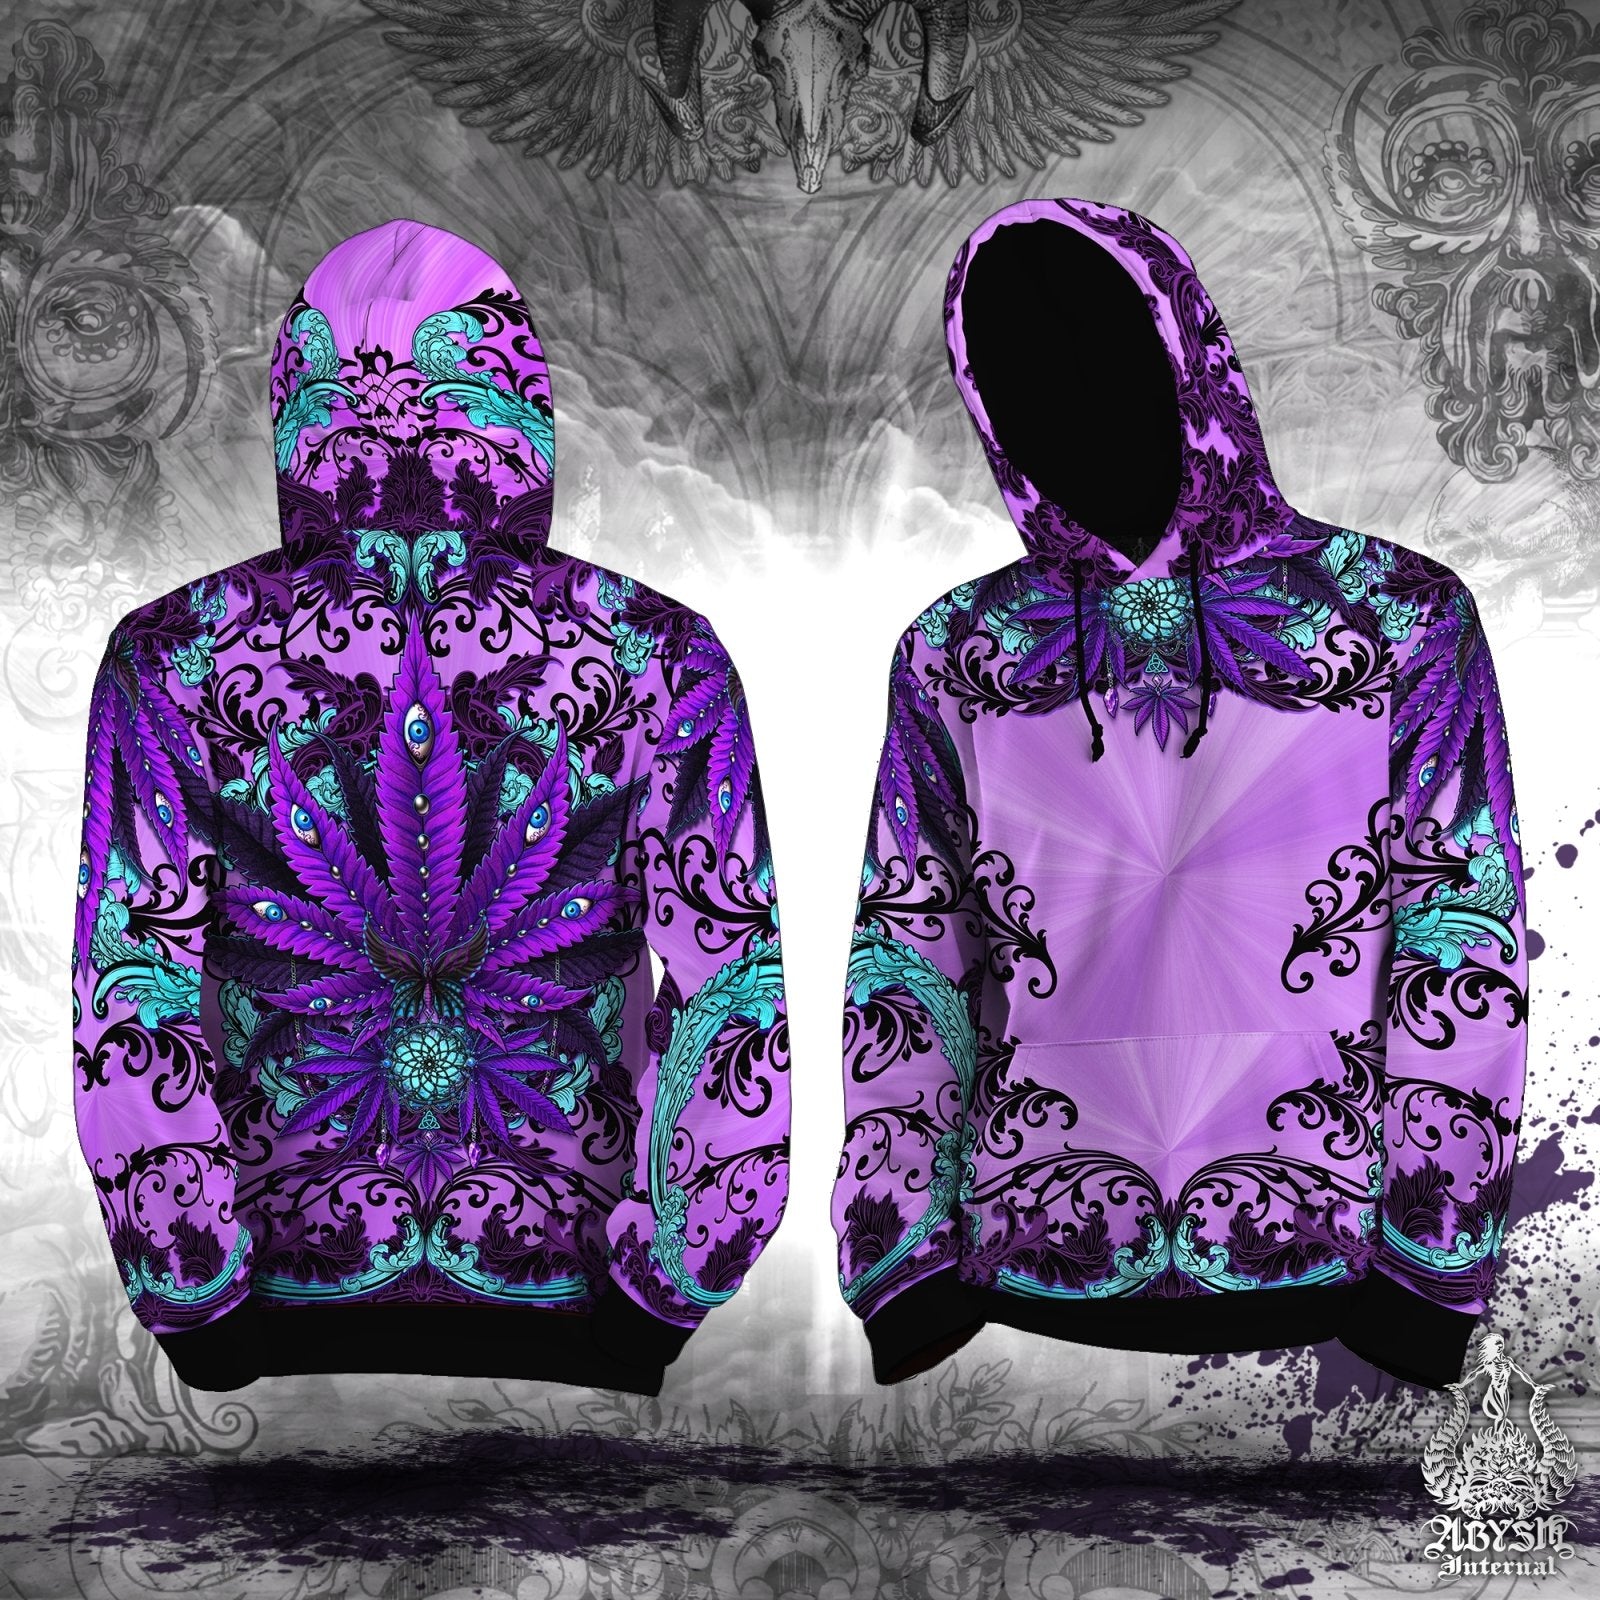 Cannabis Hoodie, Weed Concert Clothes, Gothic Festival Outfit, Pastel Goth Streetwear, Alternative Clothing, Unisex, 420 Gift - Black and Purple Marijuana - Abysm Internal